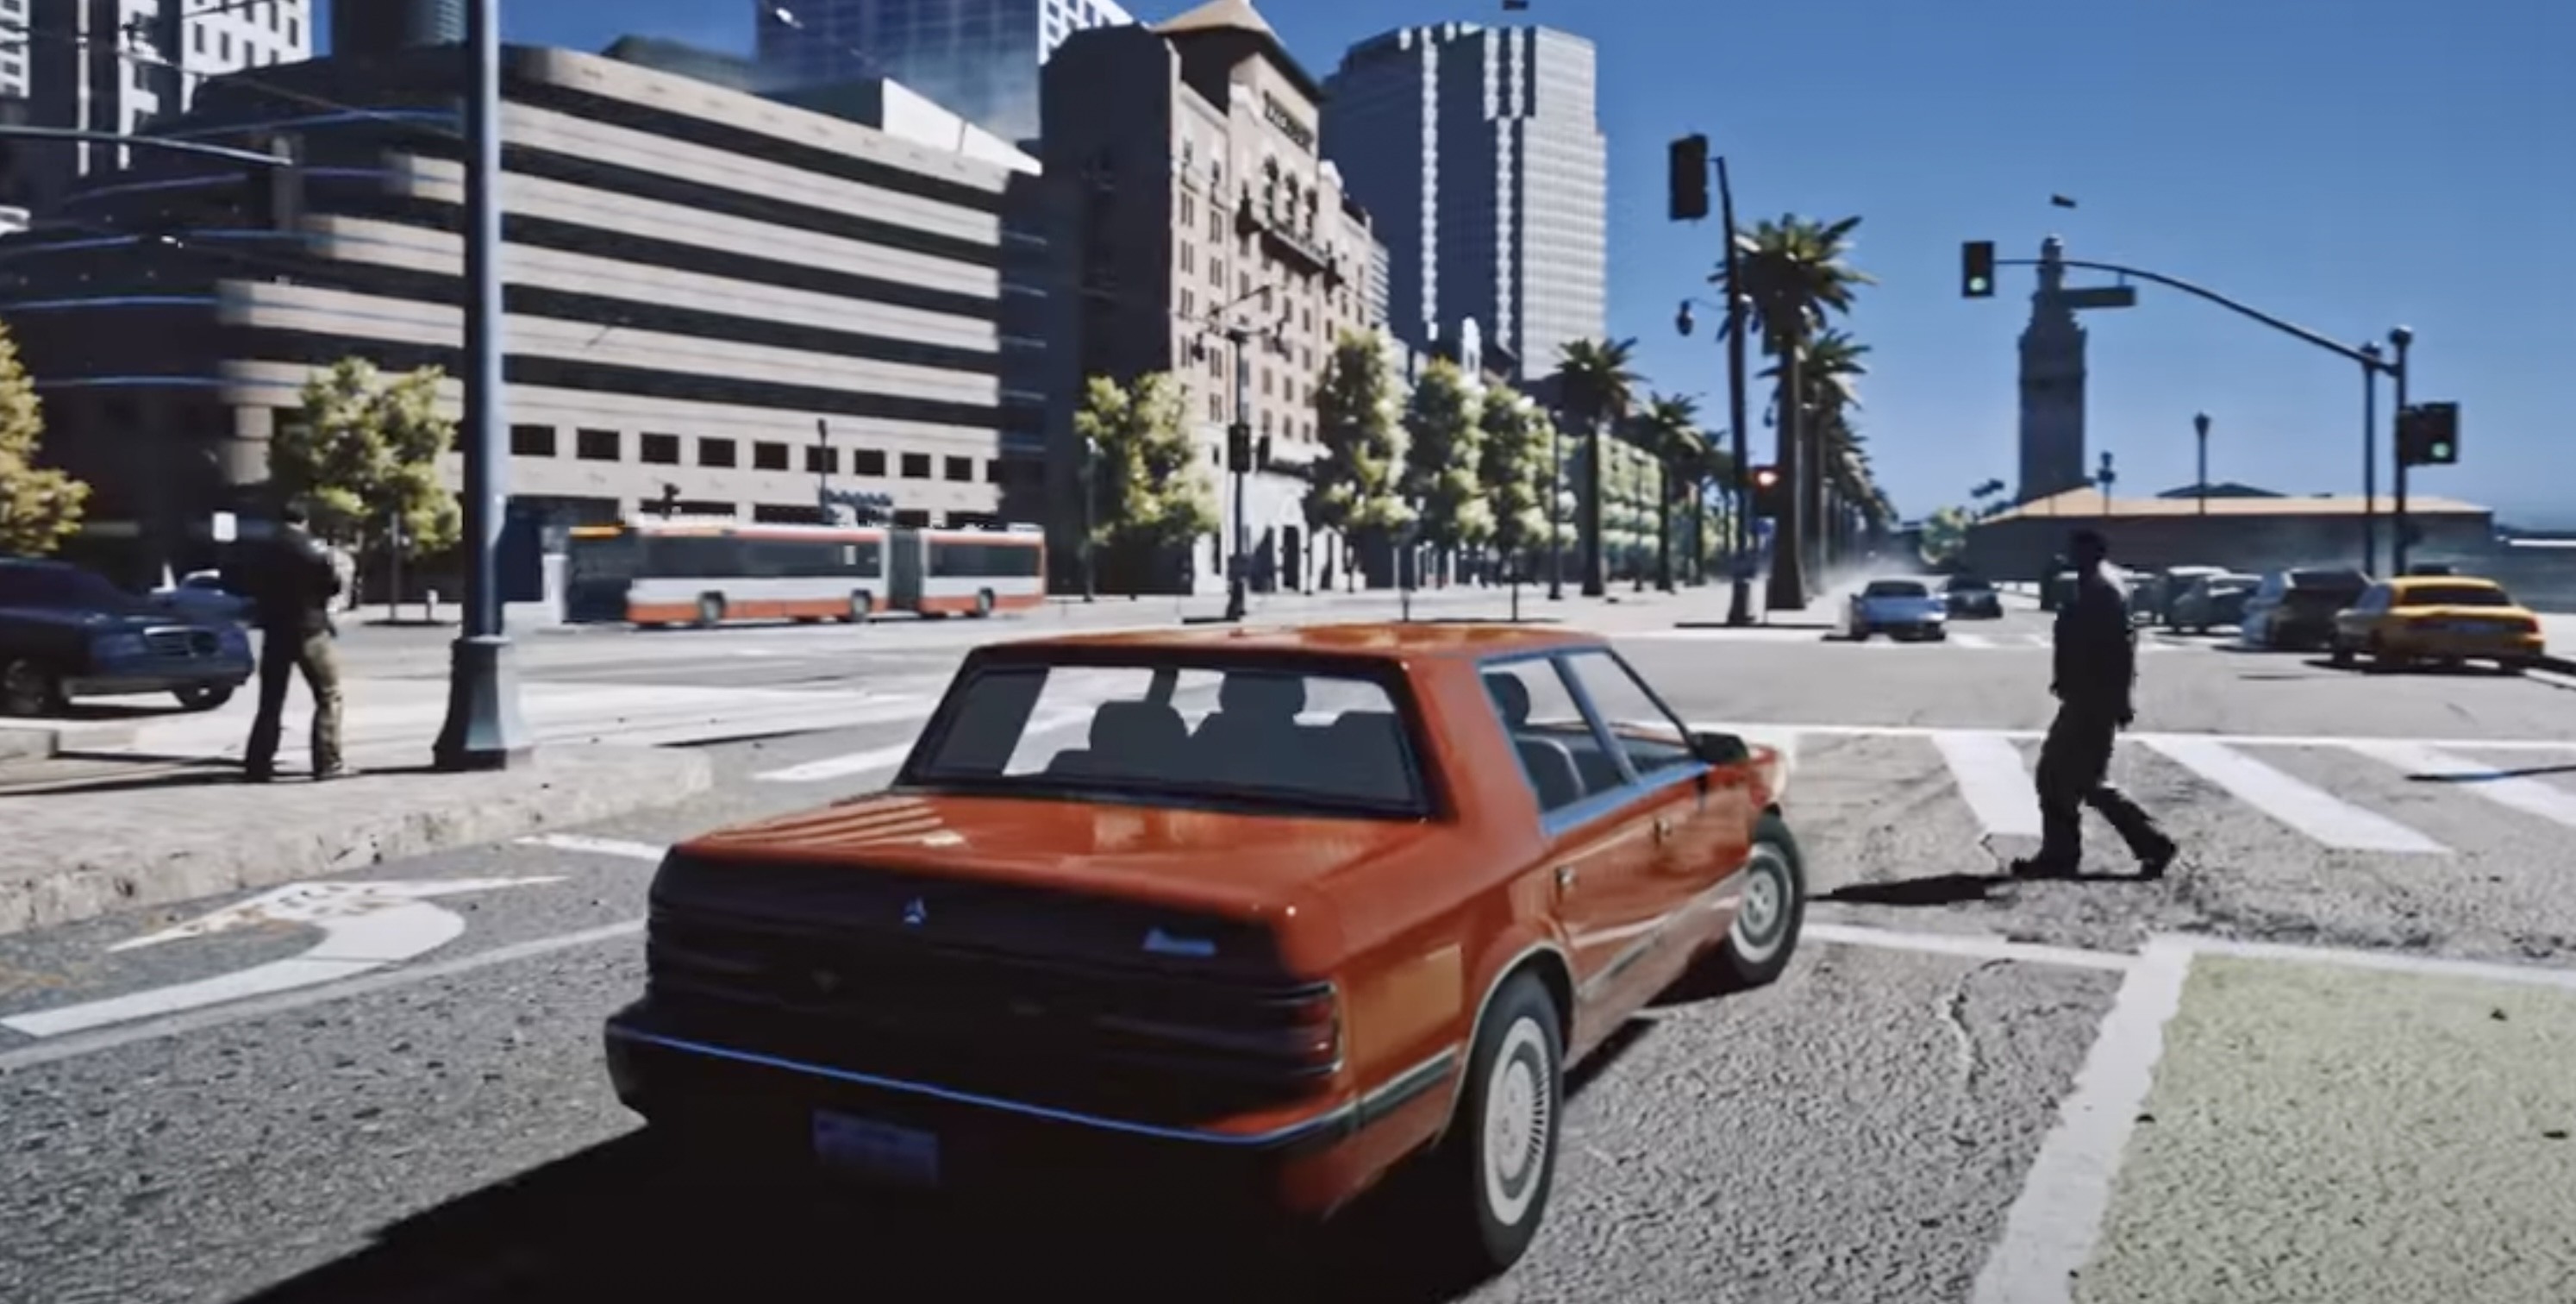 Gta 6 Concept Created In Unreal Engine 5 Looks Surreal Hopefully